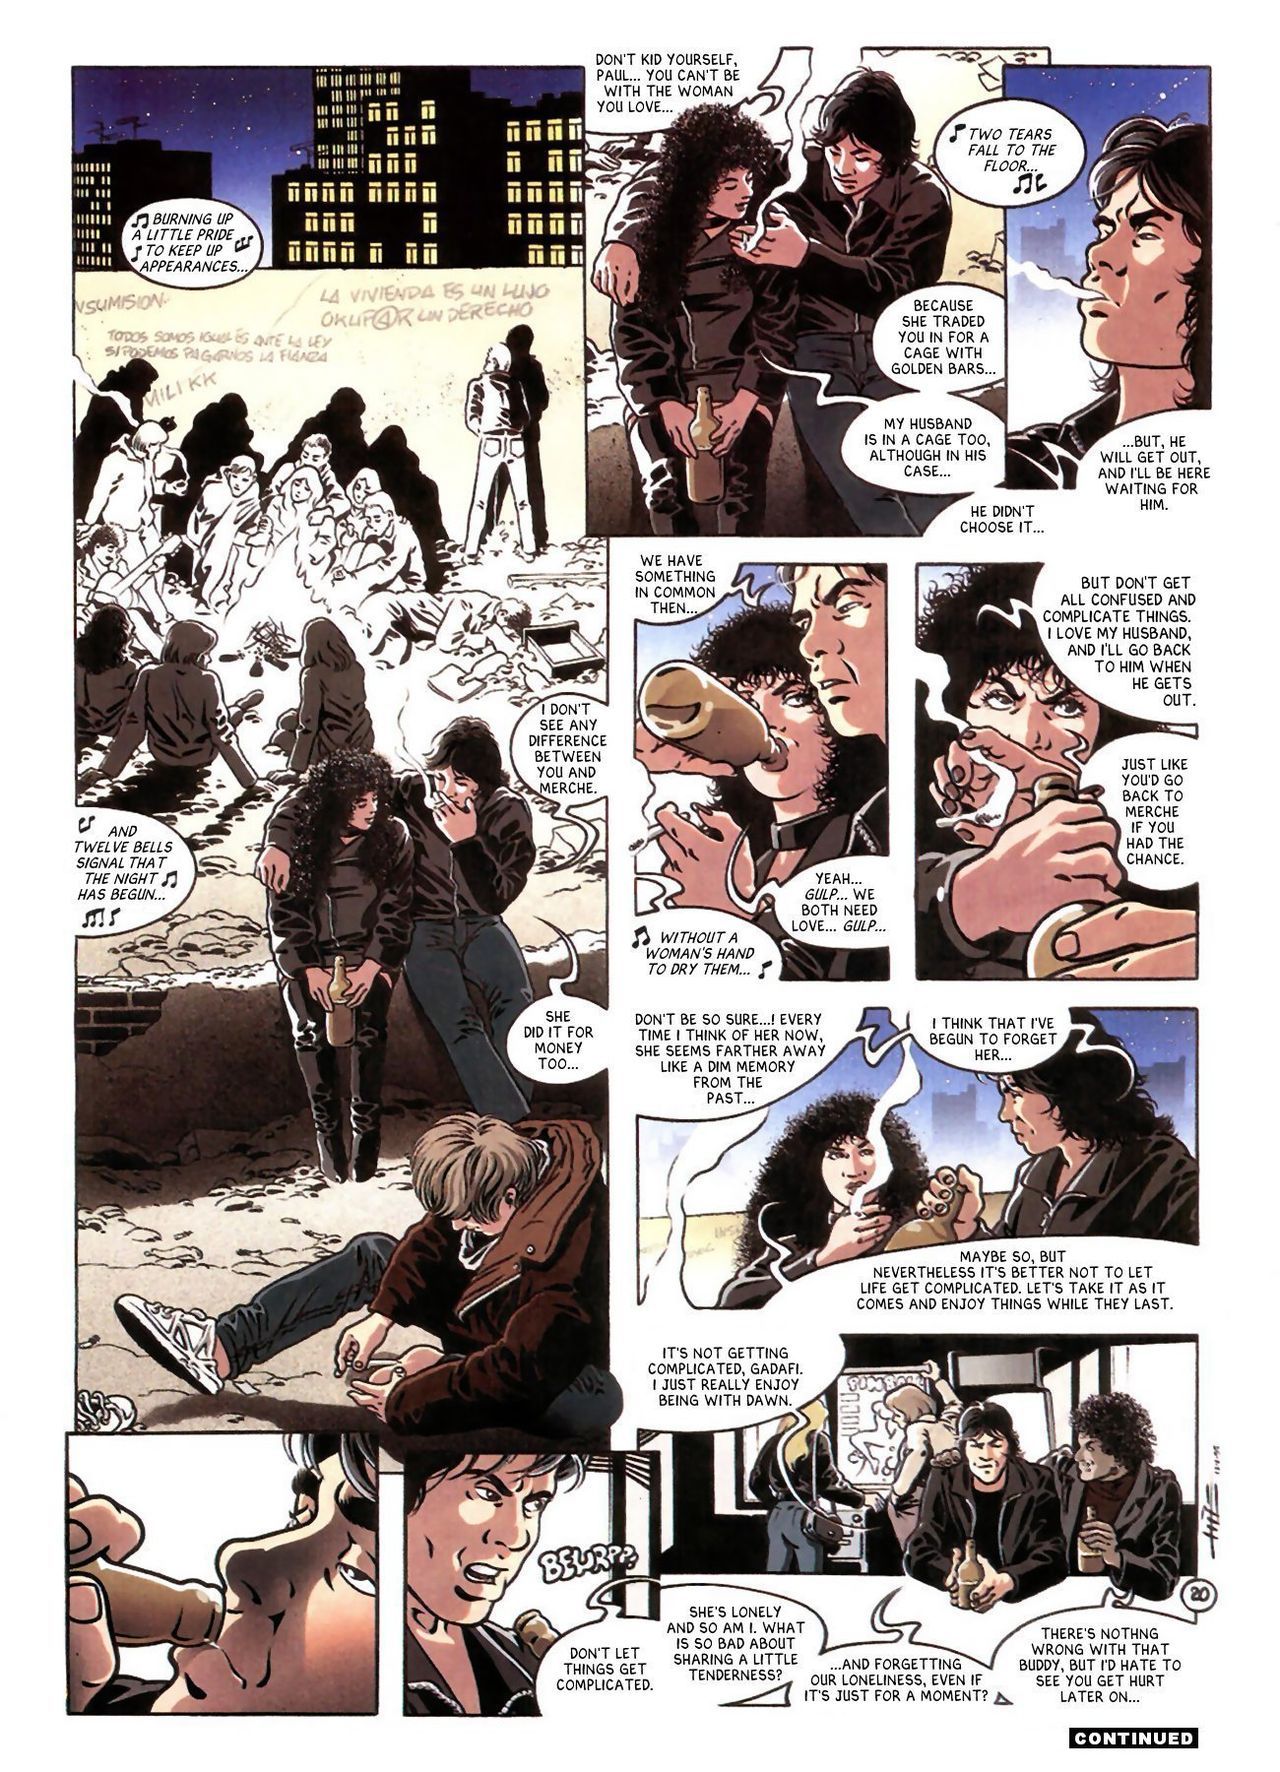 The Losers by Luis Tobalina page 21